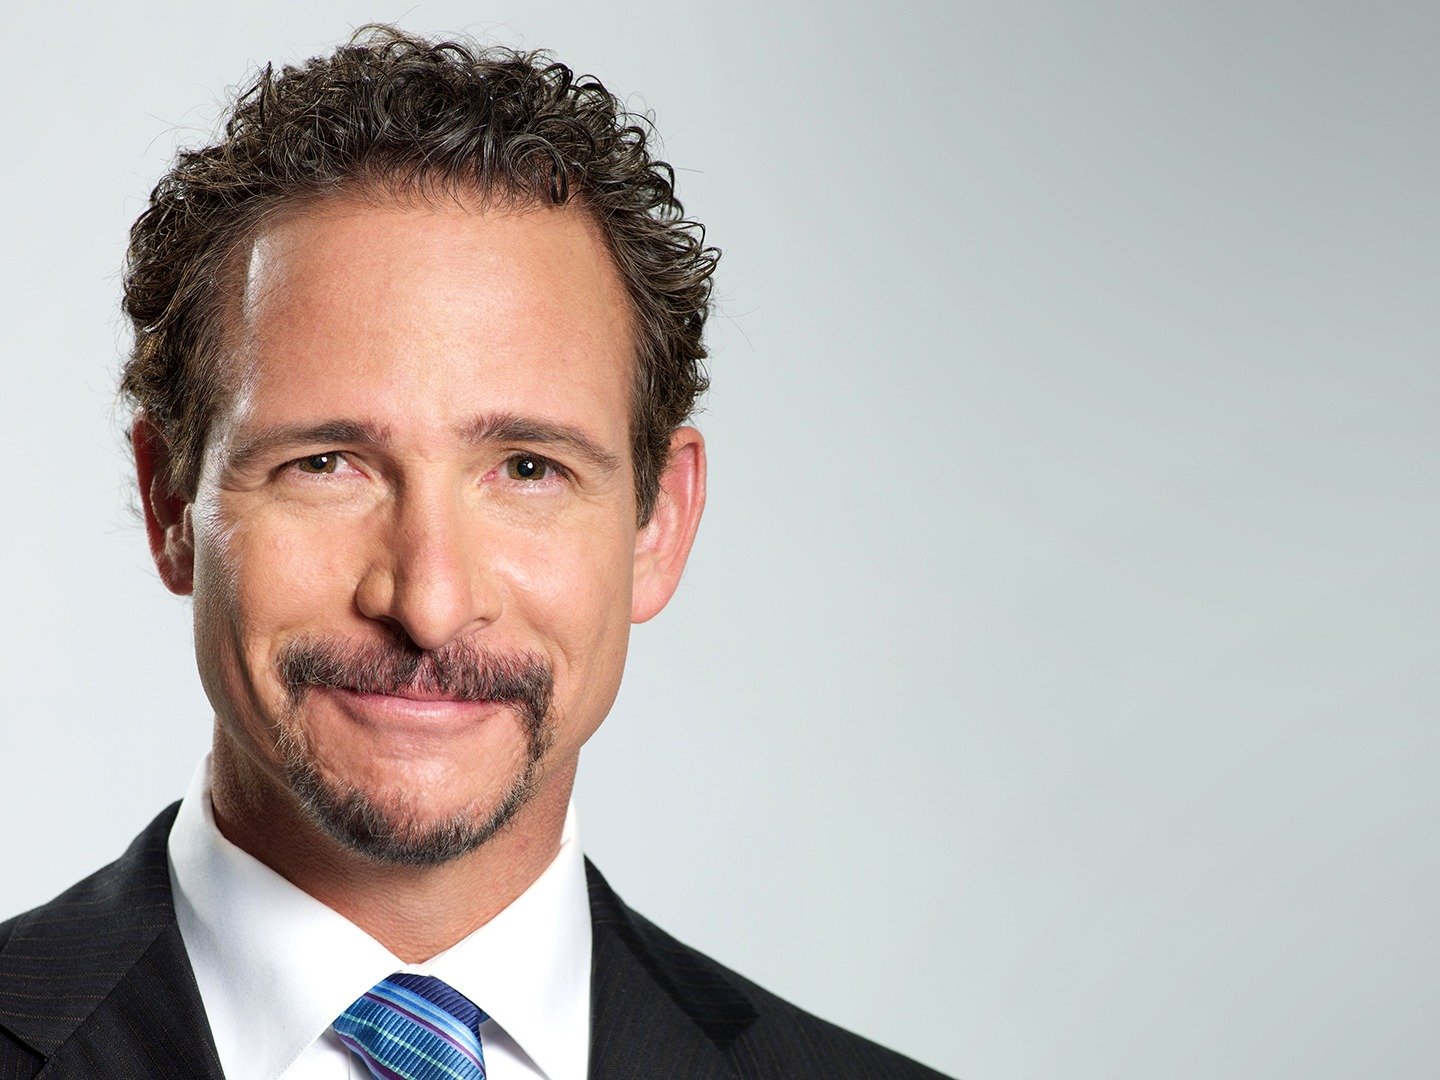 Jim Rome Show, 3:00pm on The Voice.